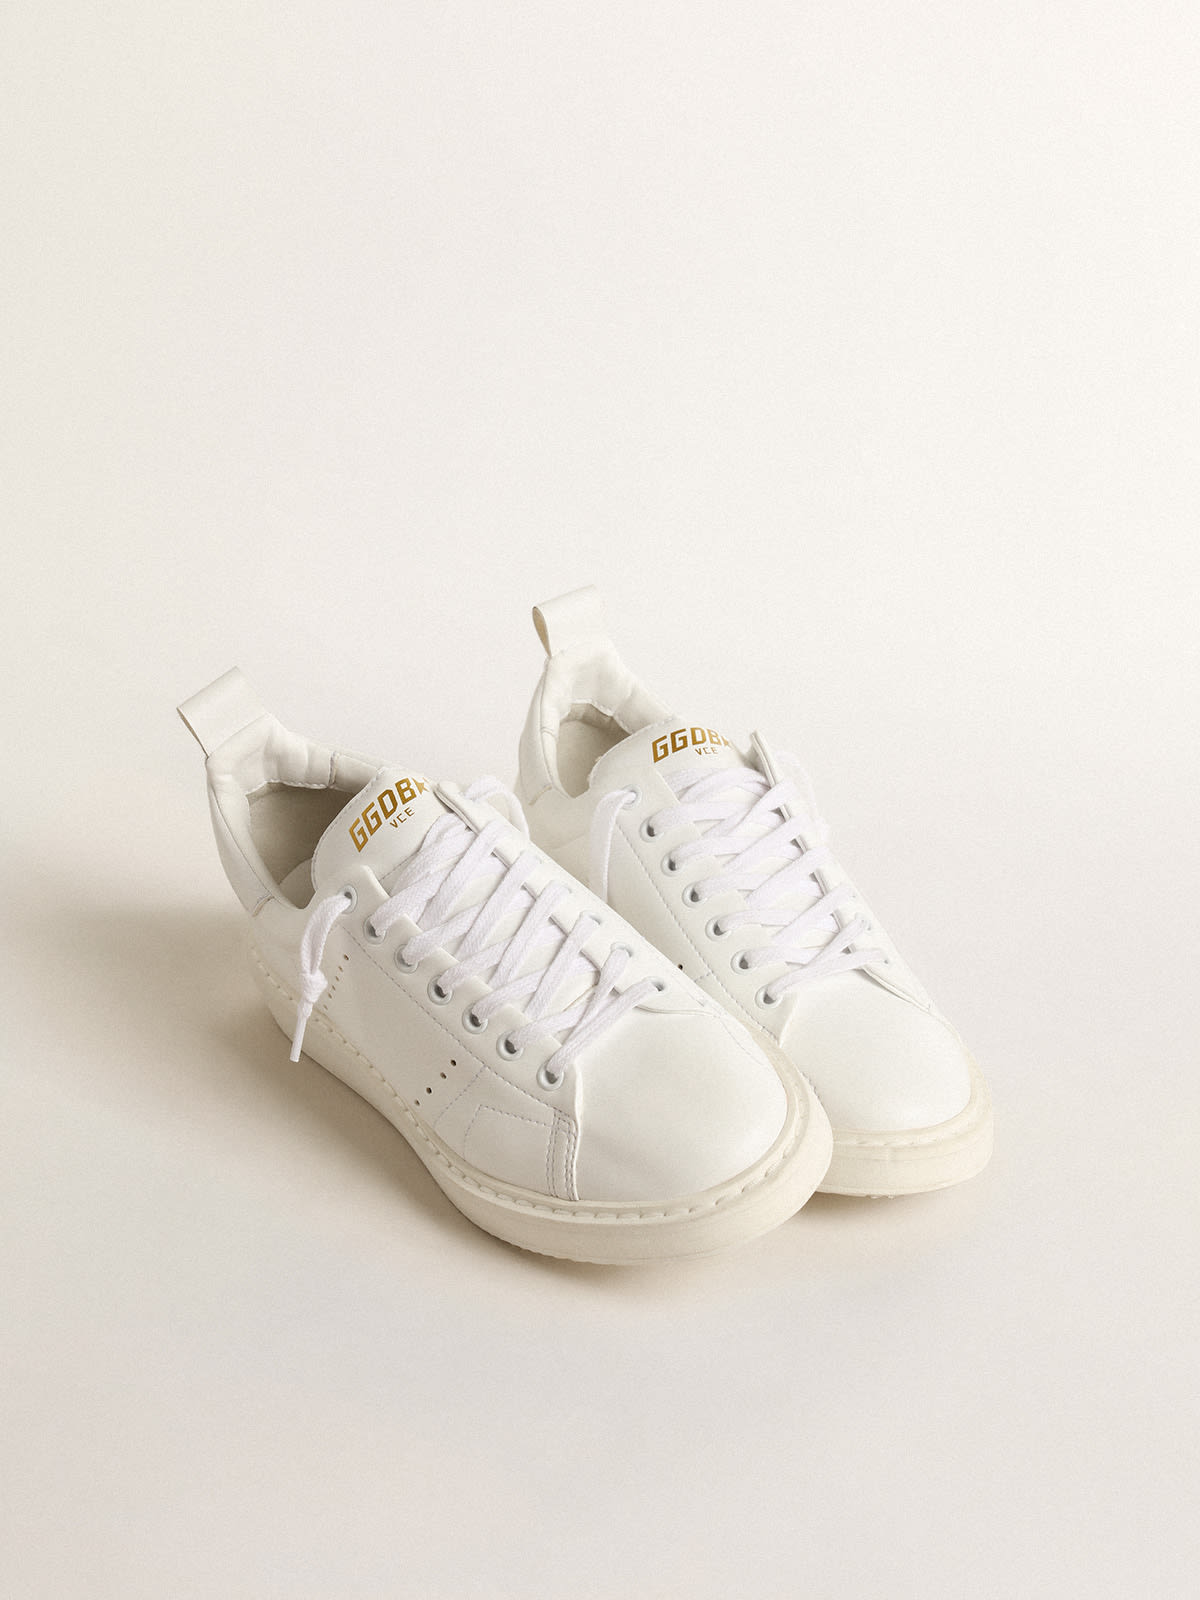 Golden Goose - Women’s bio-based Starter with white star and heel tab in 